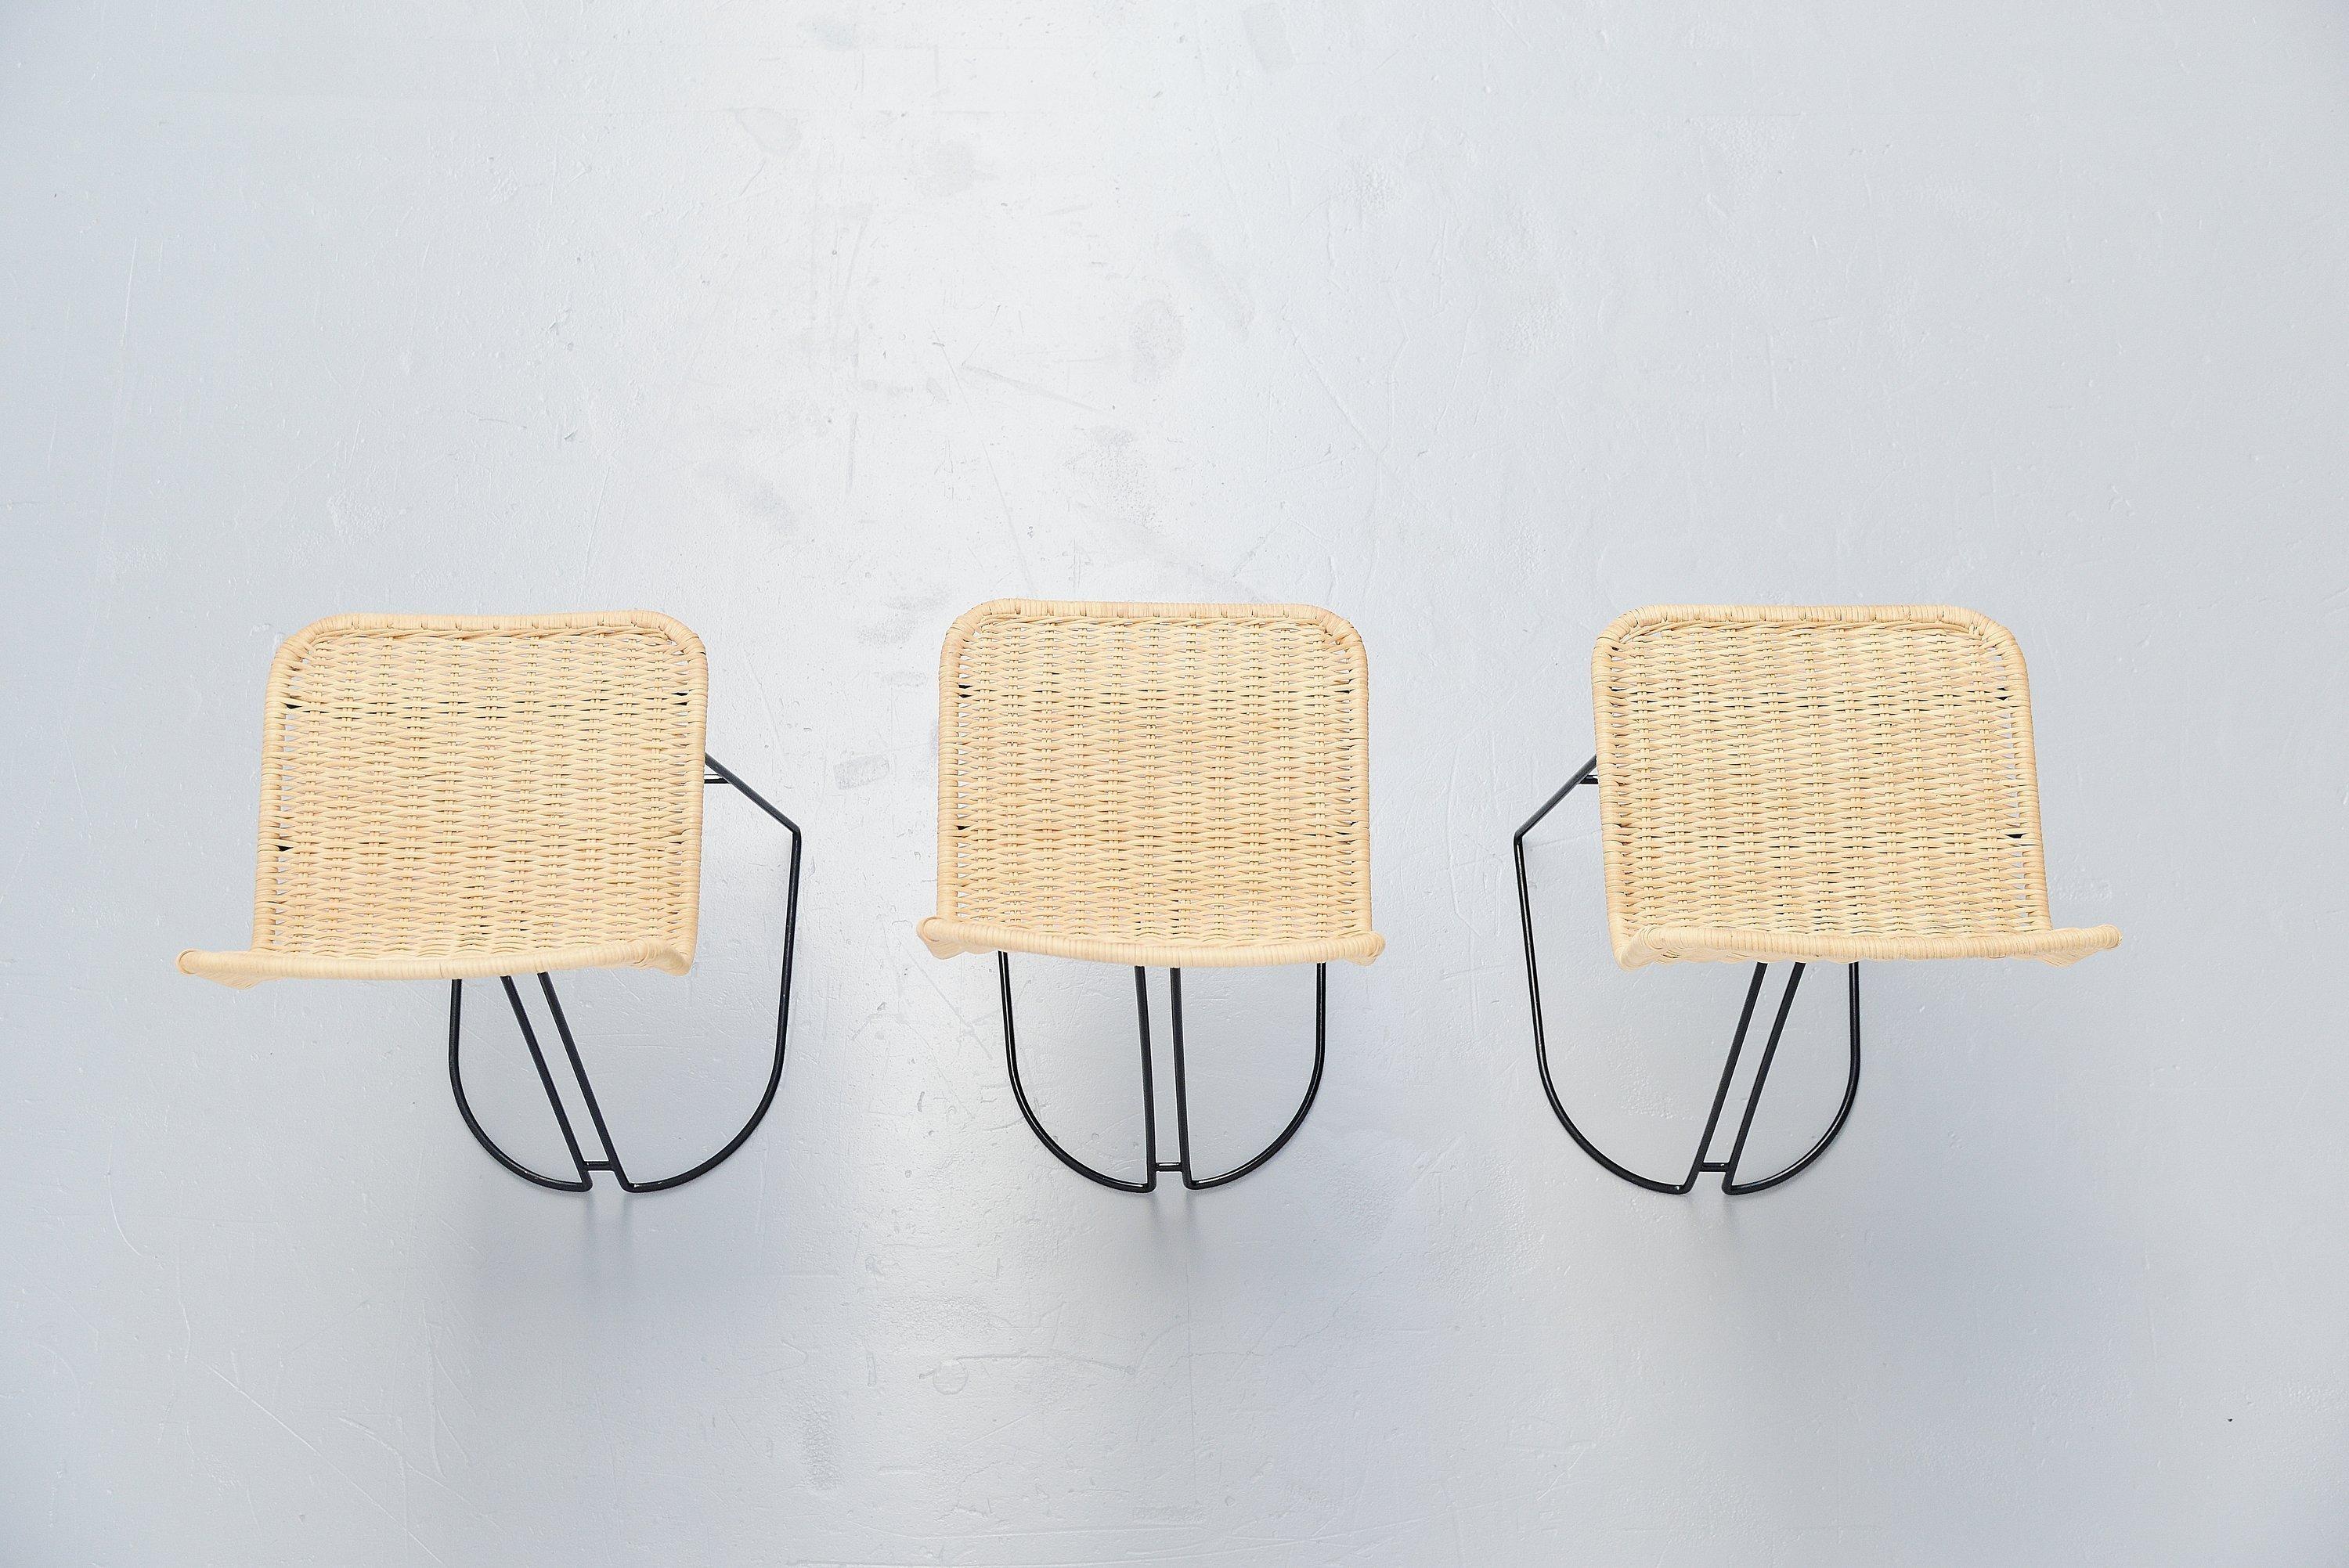 Dutch Modernist Bar Stools in Cane, Holland, 1970 In Good Condition For Sale In Roosendaal, Noord Brabant